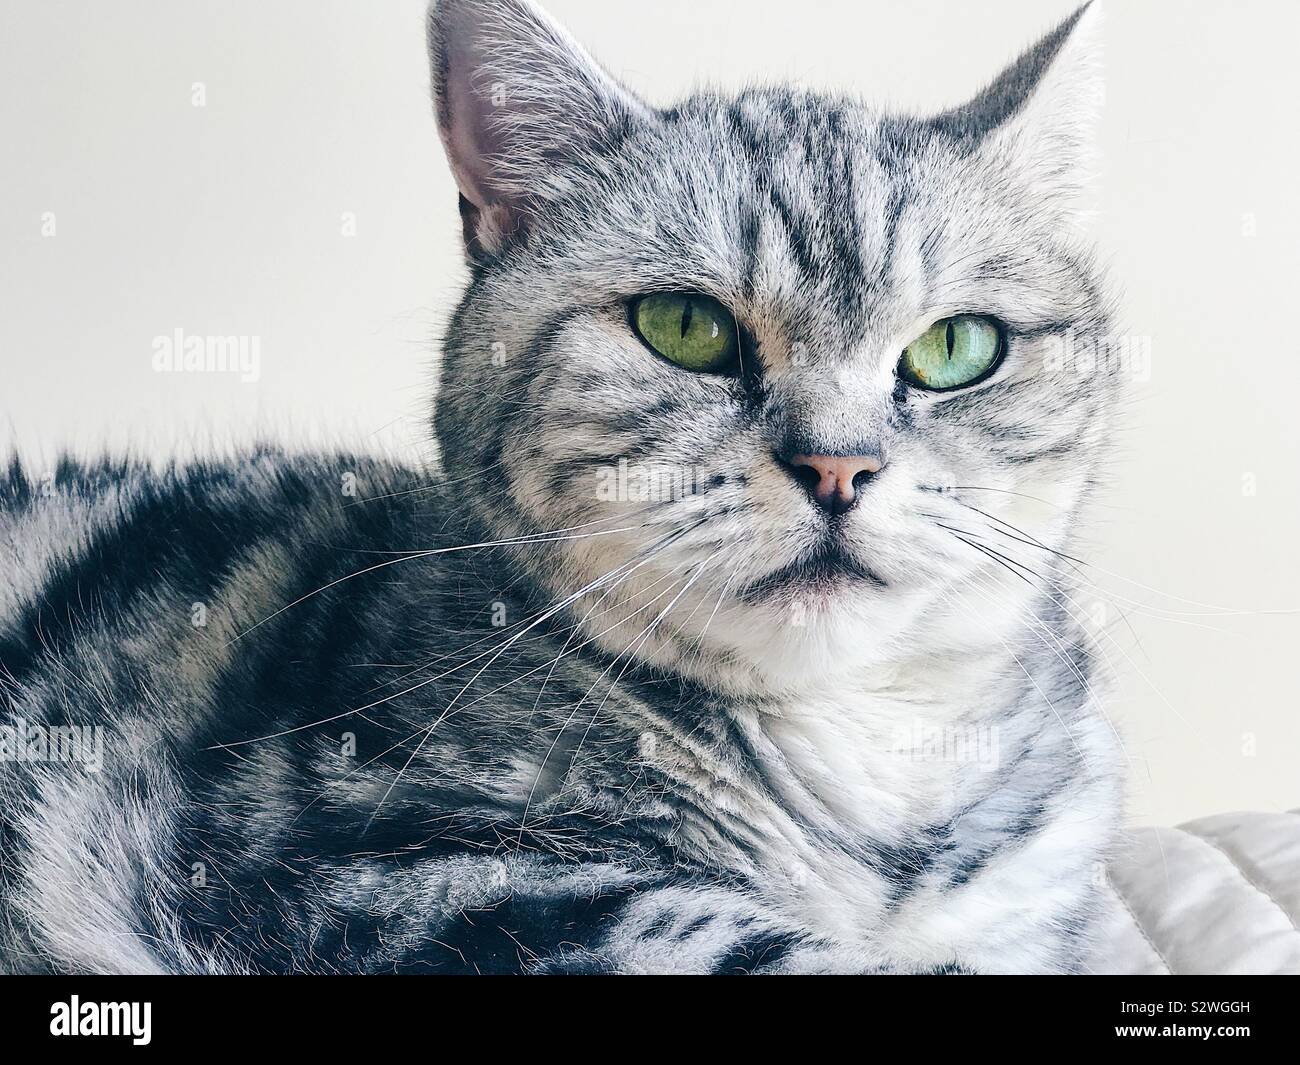 British shorthair silver tabby cat sitting on a bed Banque D'Images